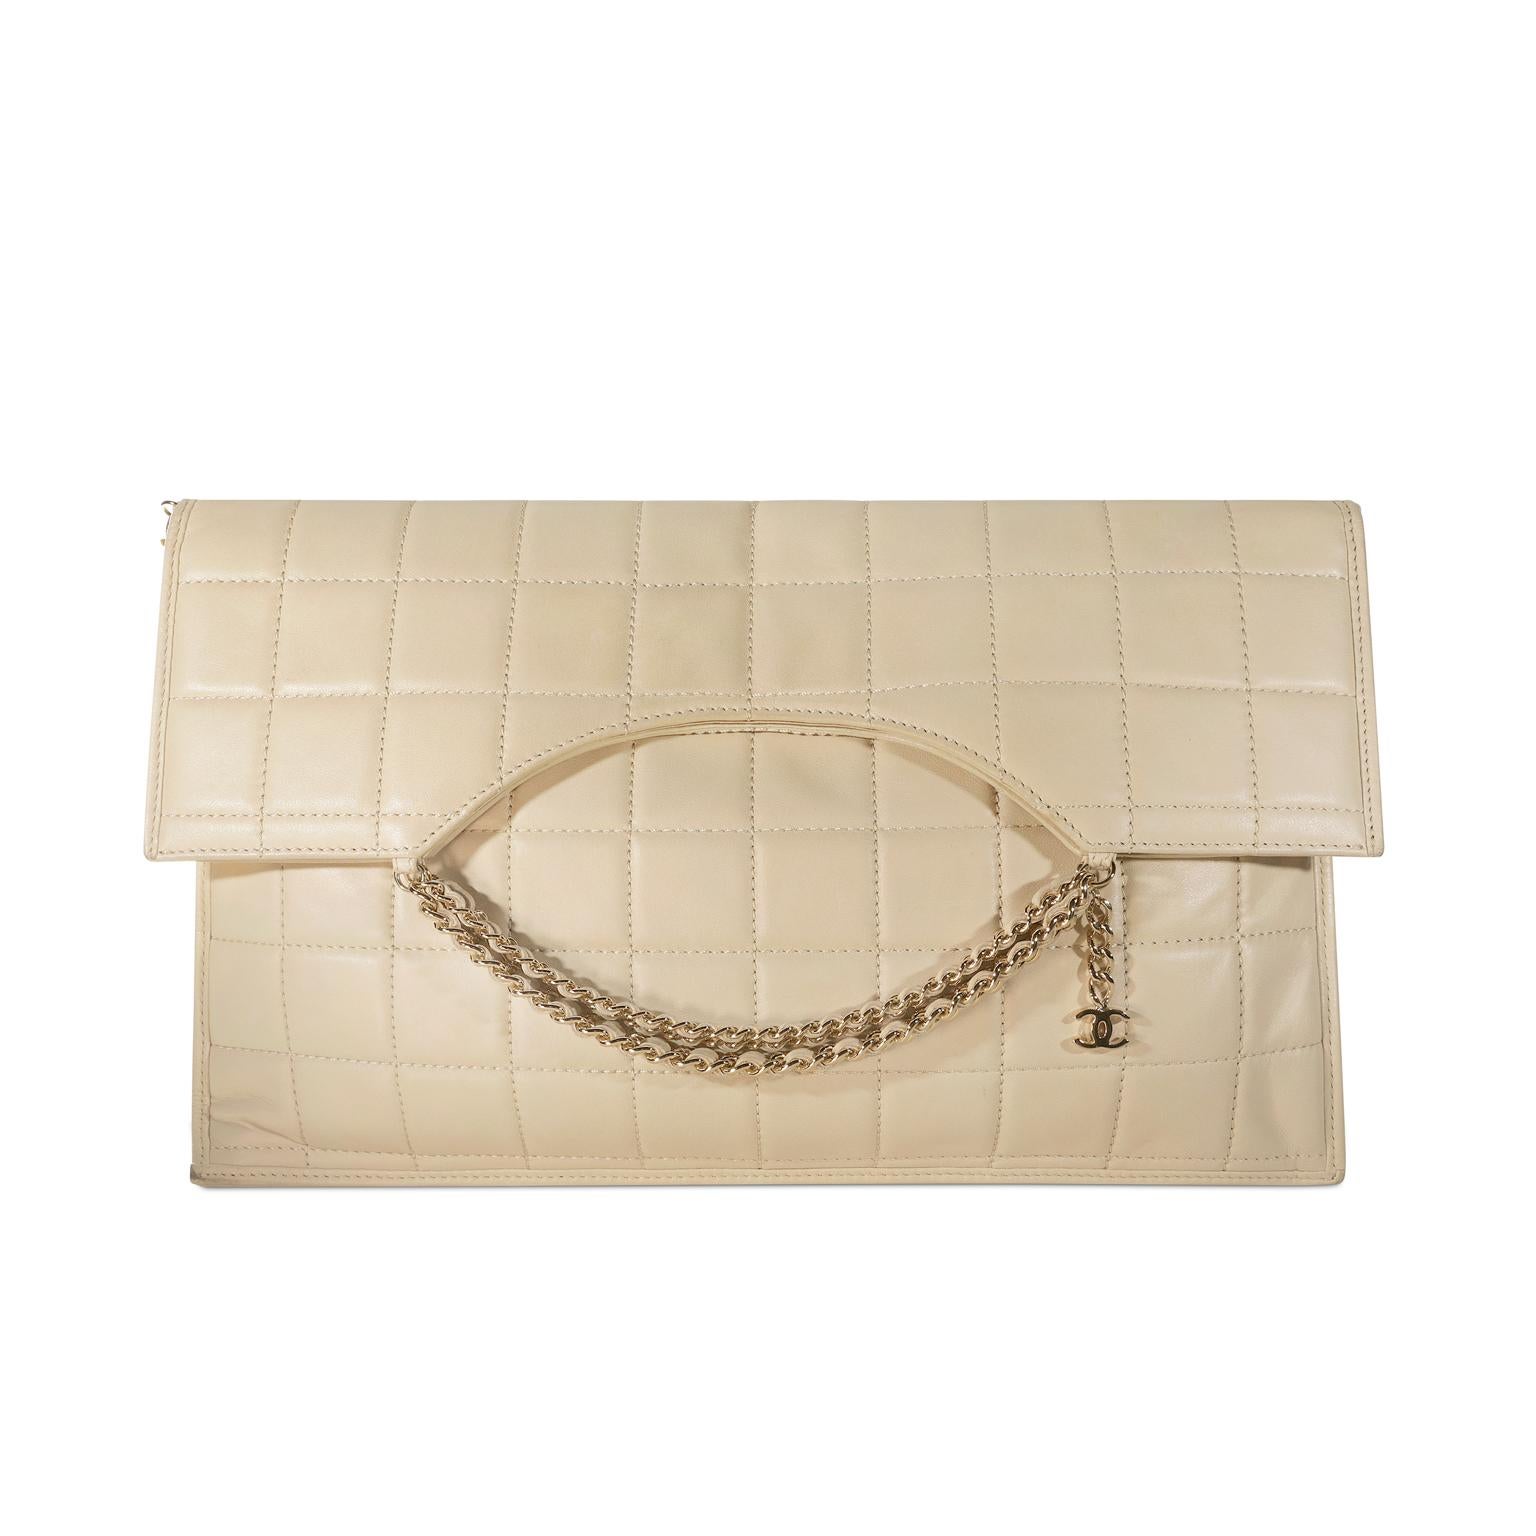 Chanel Beige Leather Multi Chain Convertible Envelope Clutch 4